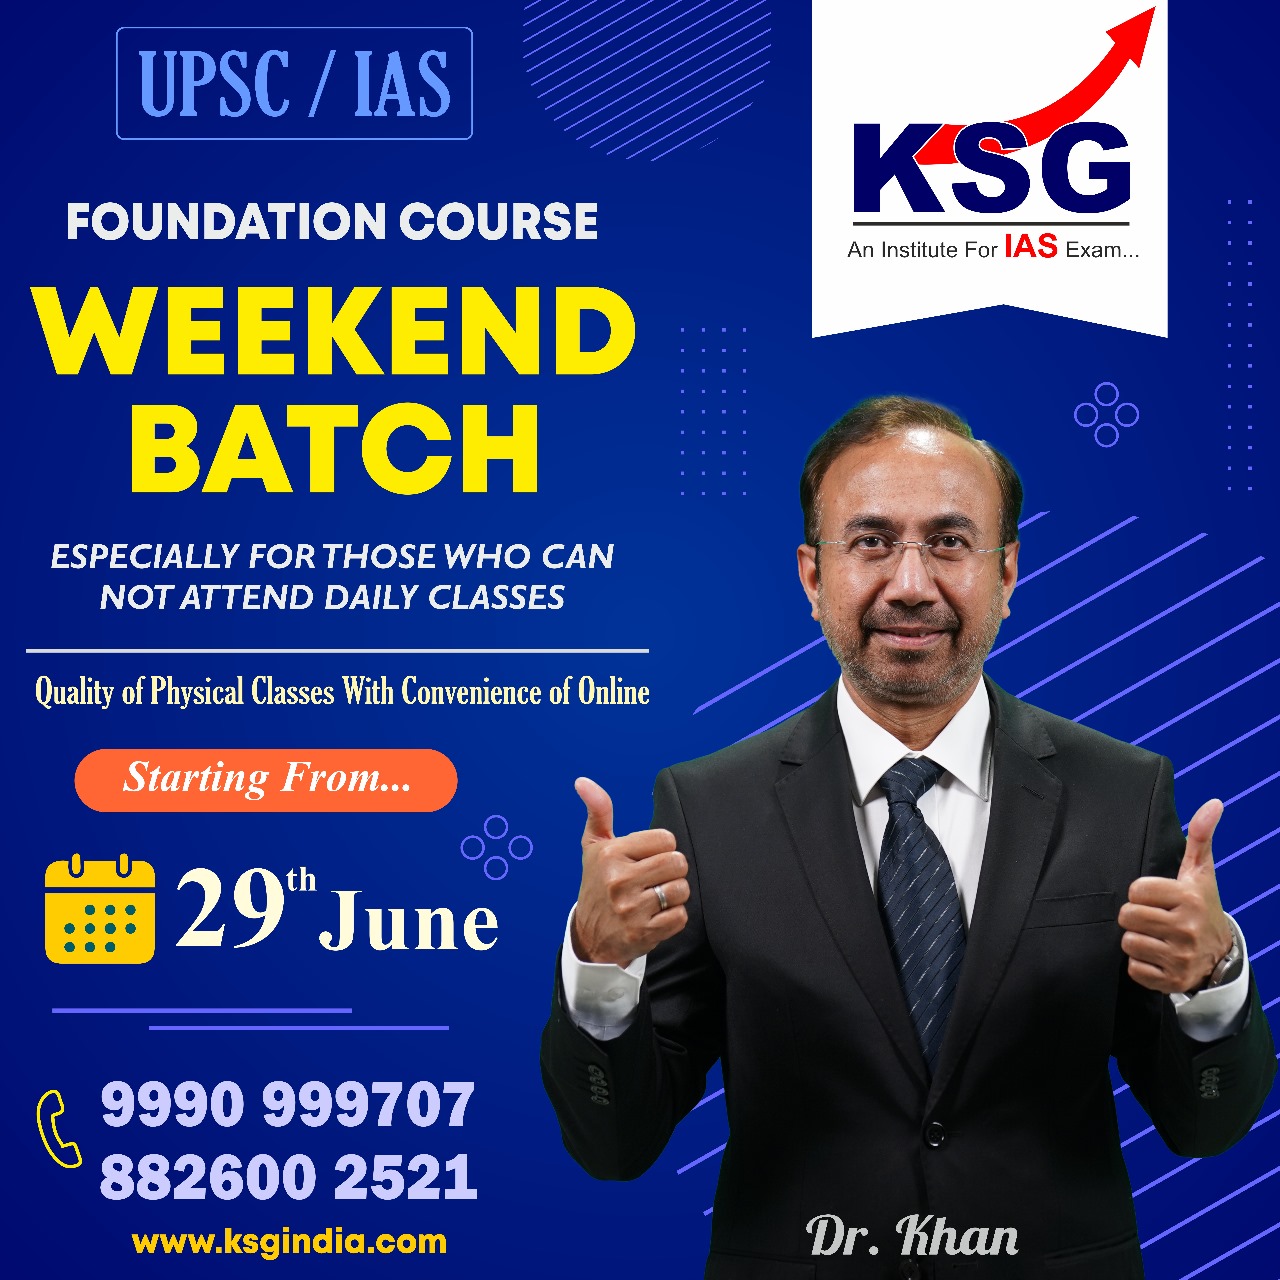 Weekend Batch For UPSC | IAS Weekend Batches - KSG India